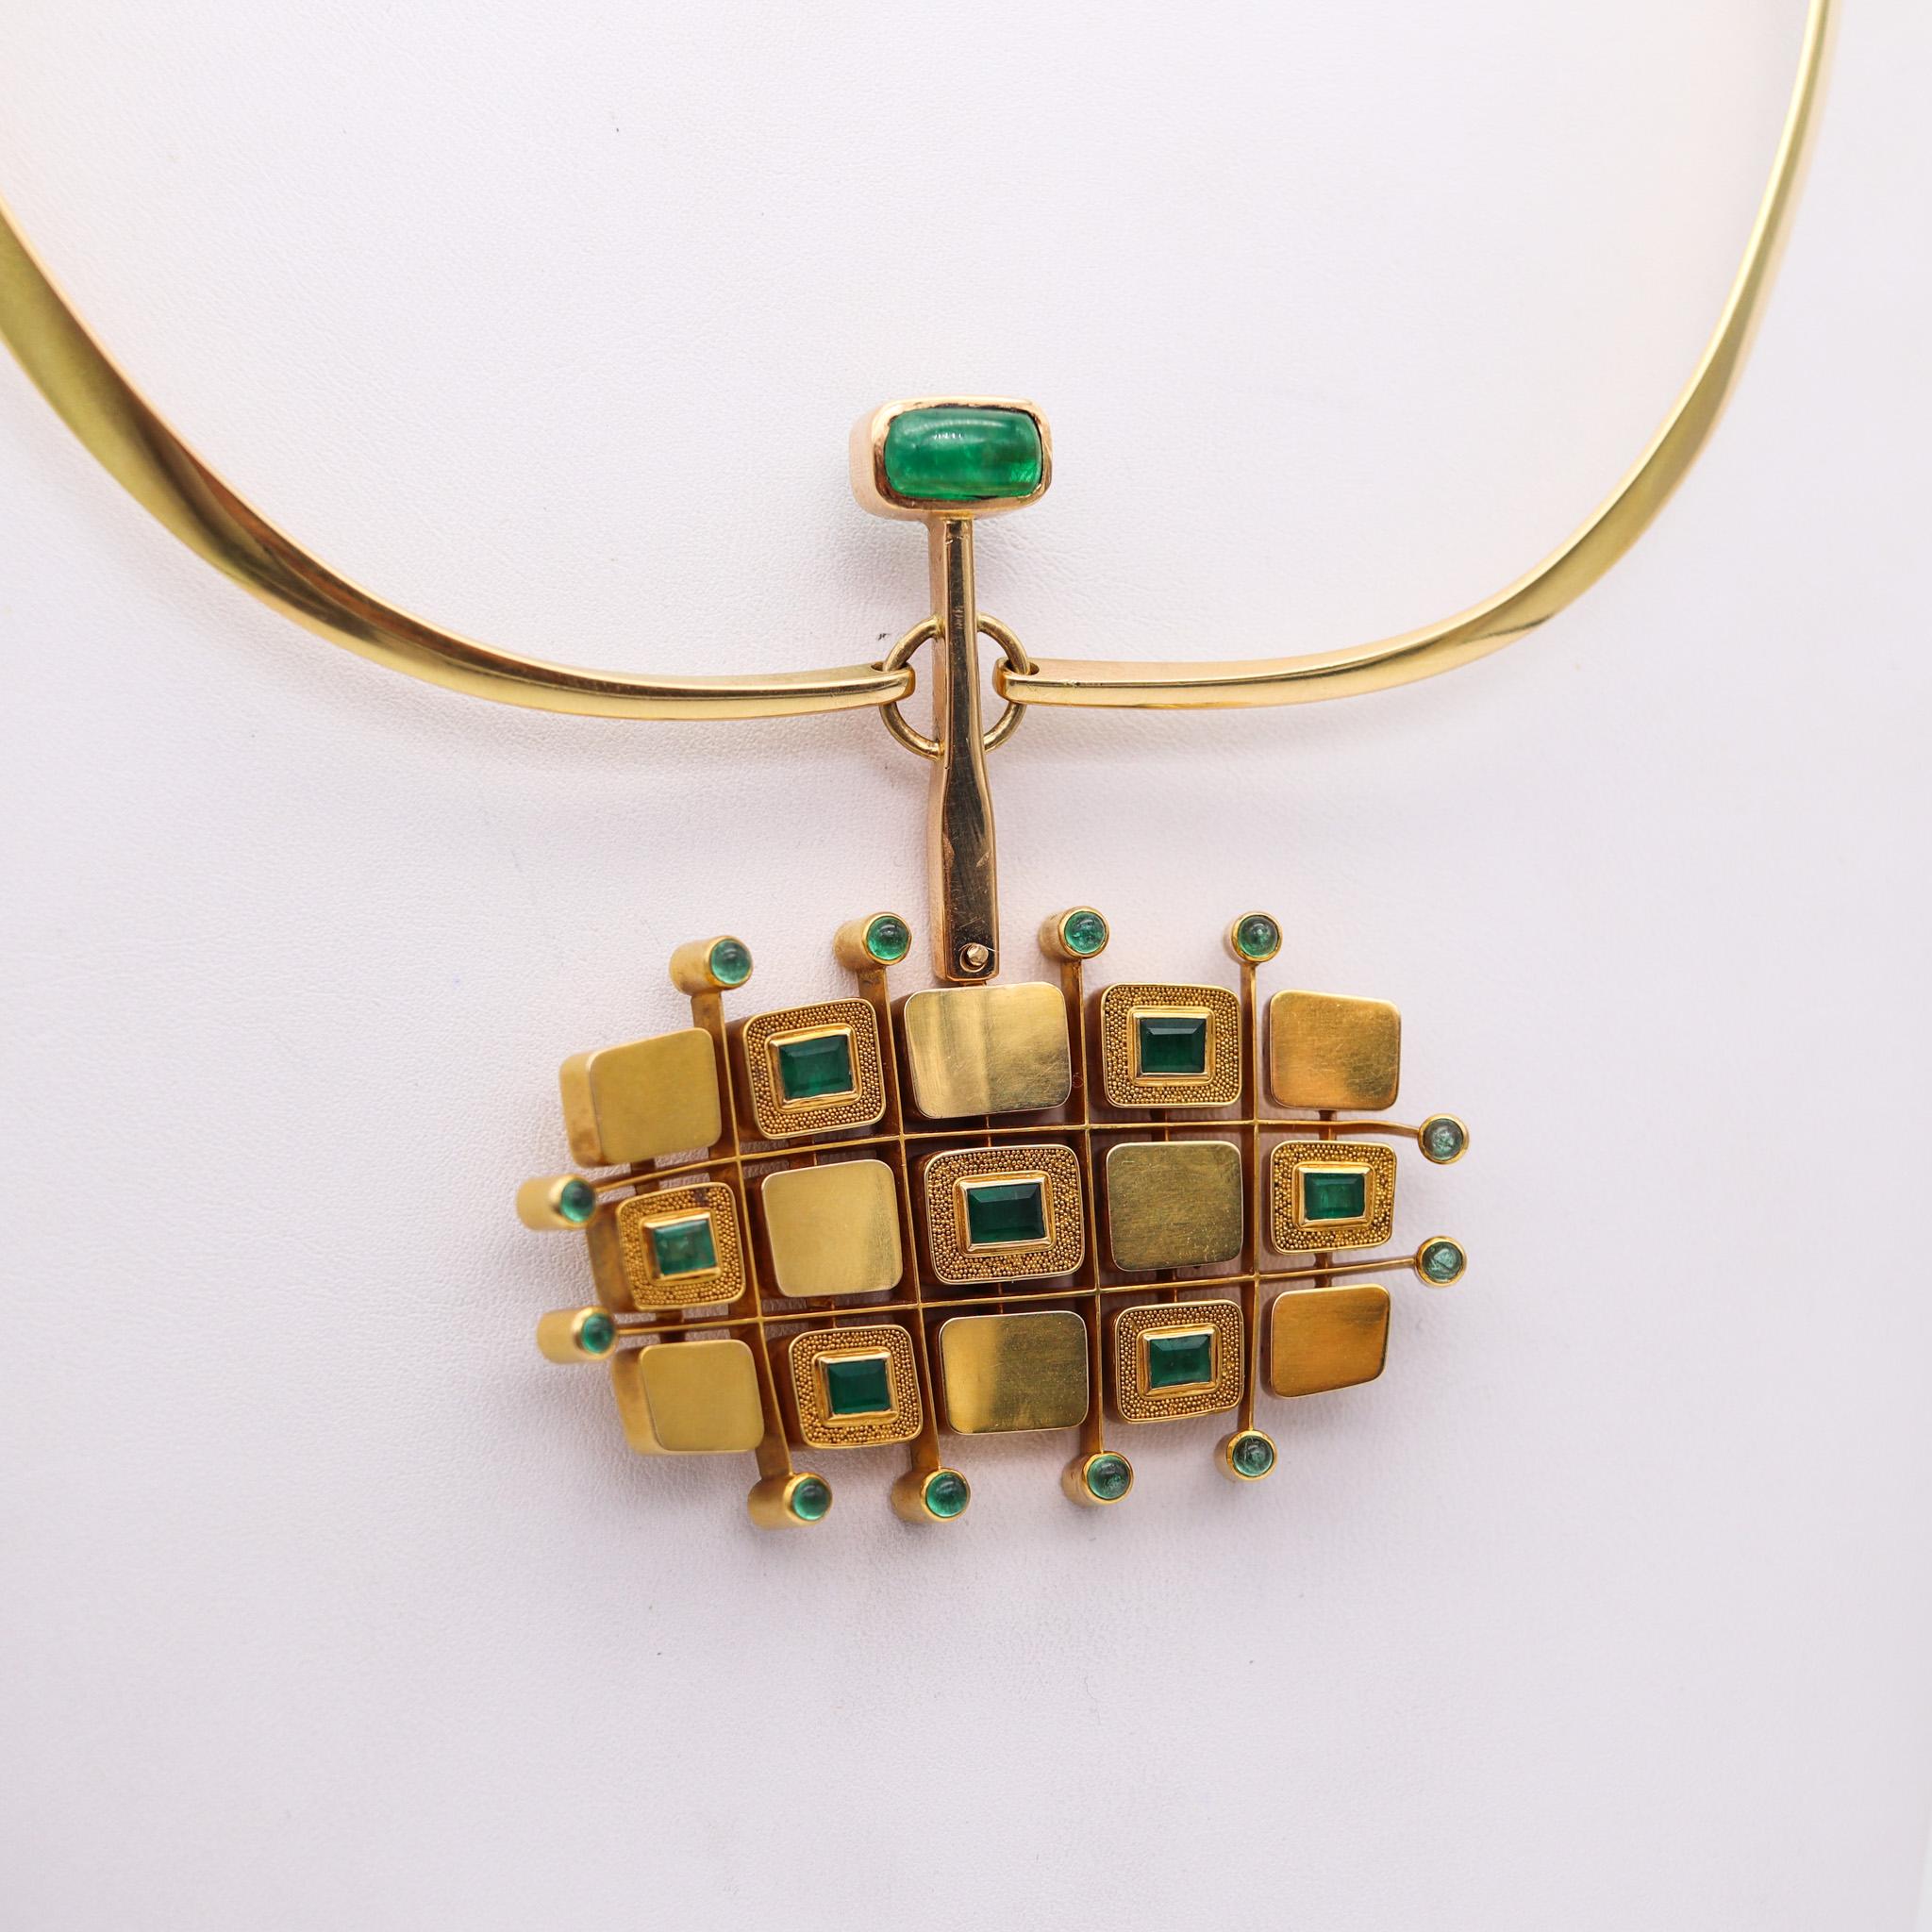 An Scandinavian geometric sculptural collar with pendant

Fabulous piece of jewelry of ultra-modernist art, created in northern Europe, back in the1970. This collar necklace was made with geometric patterns in some Scandinavian country, most